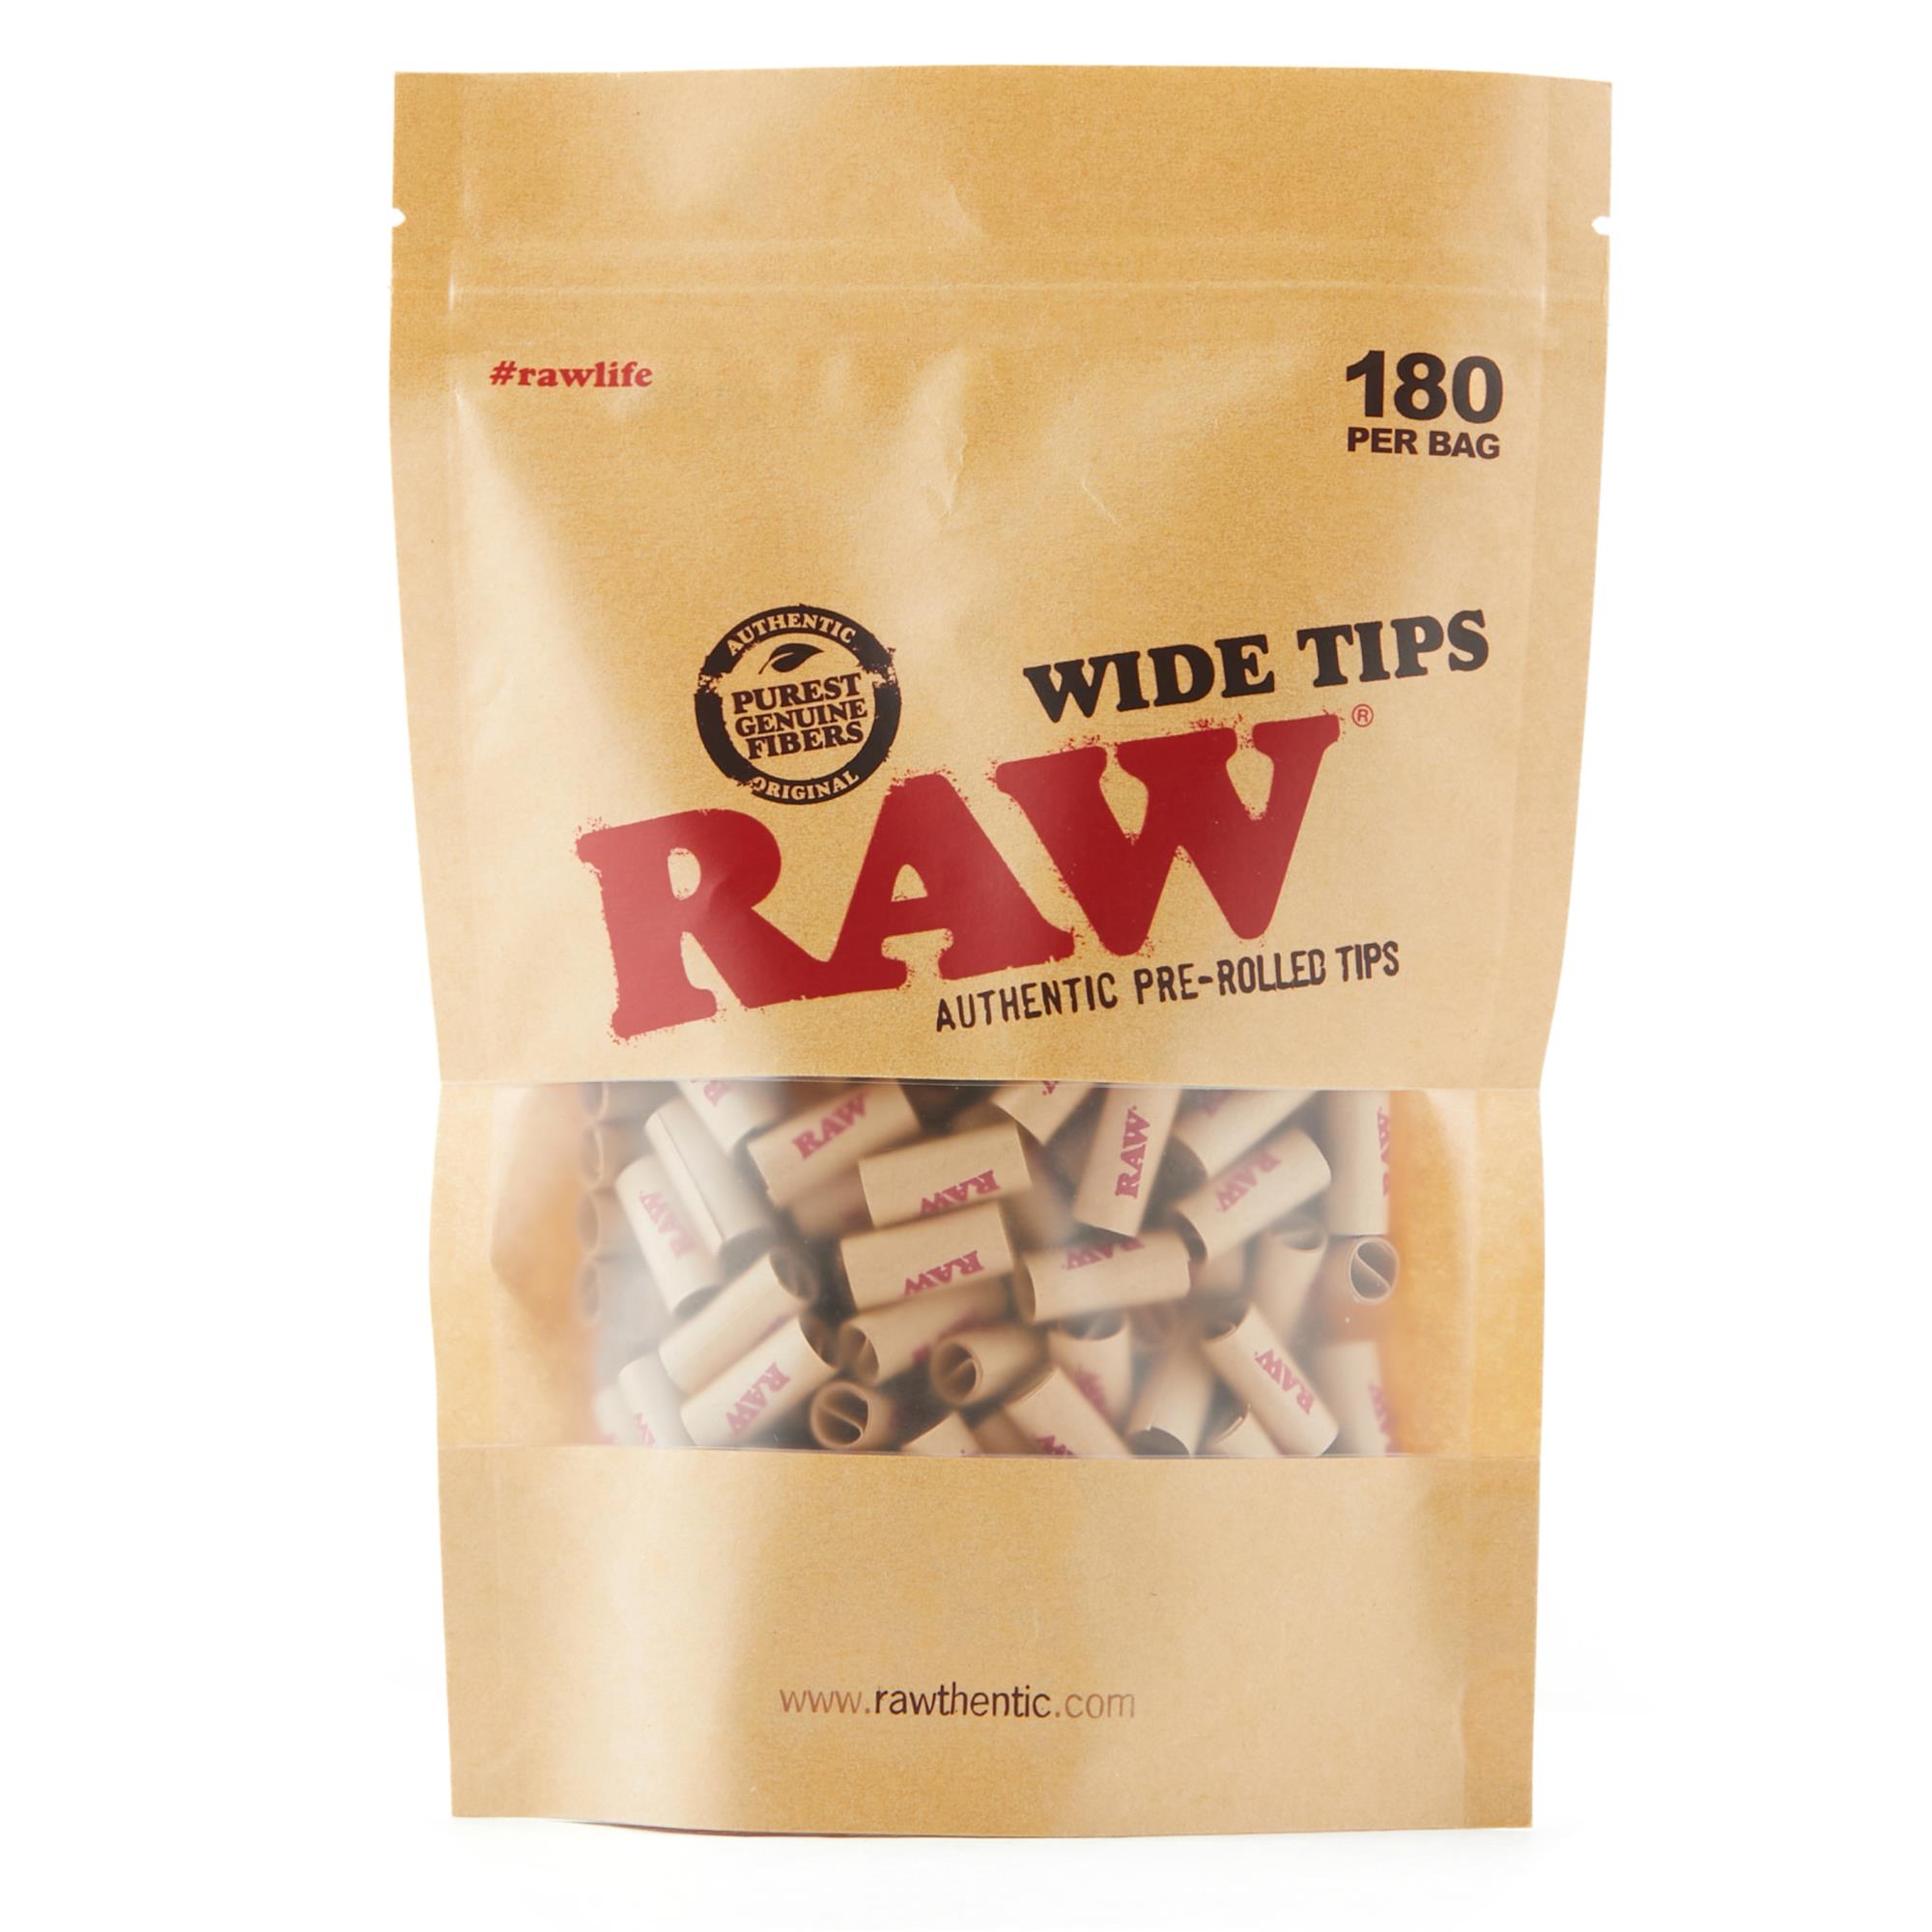 RAW WIDE TIPS PRE-ROLLED